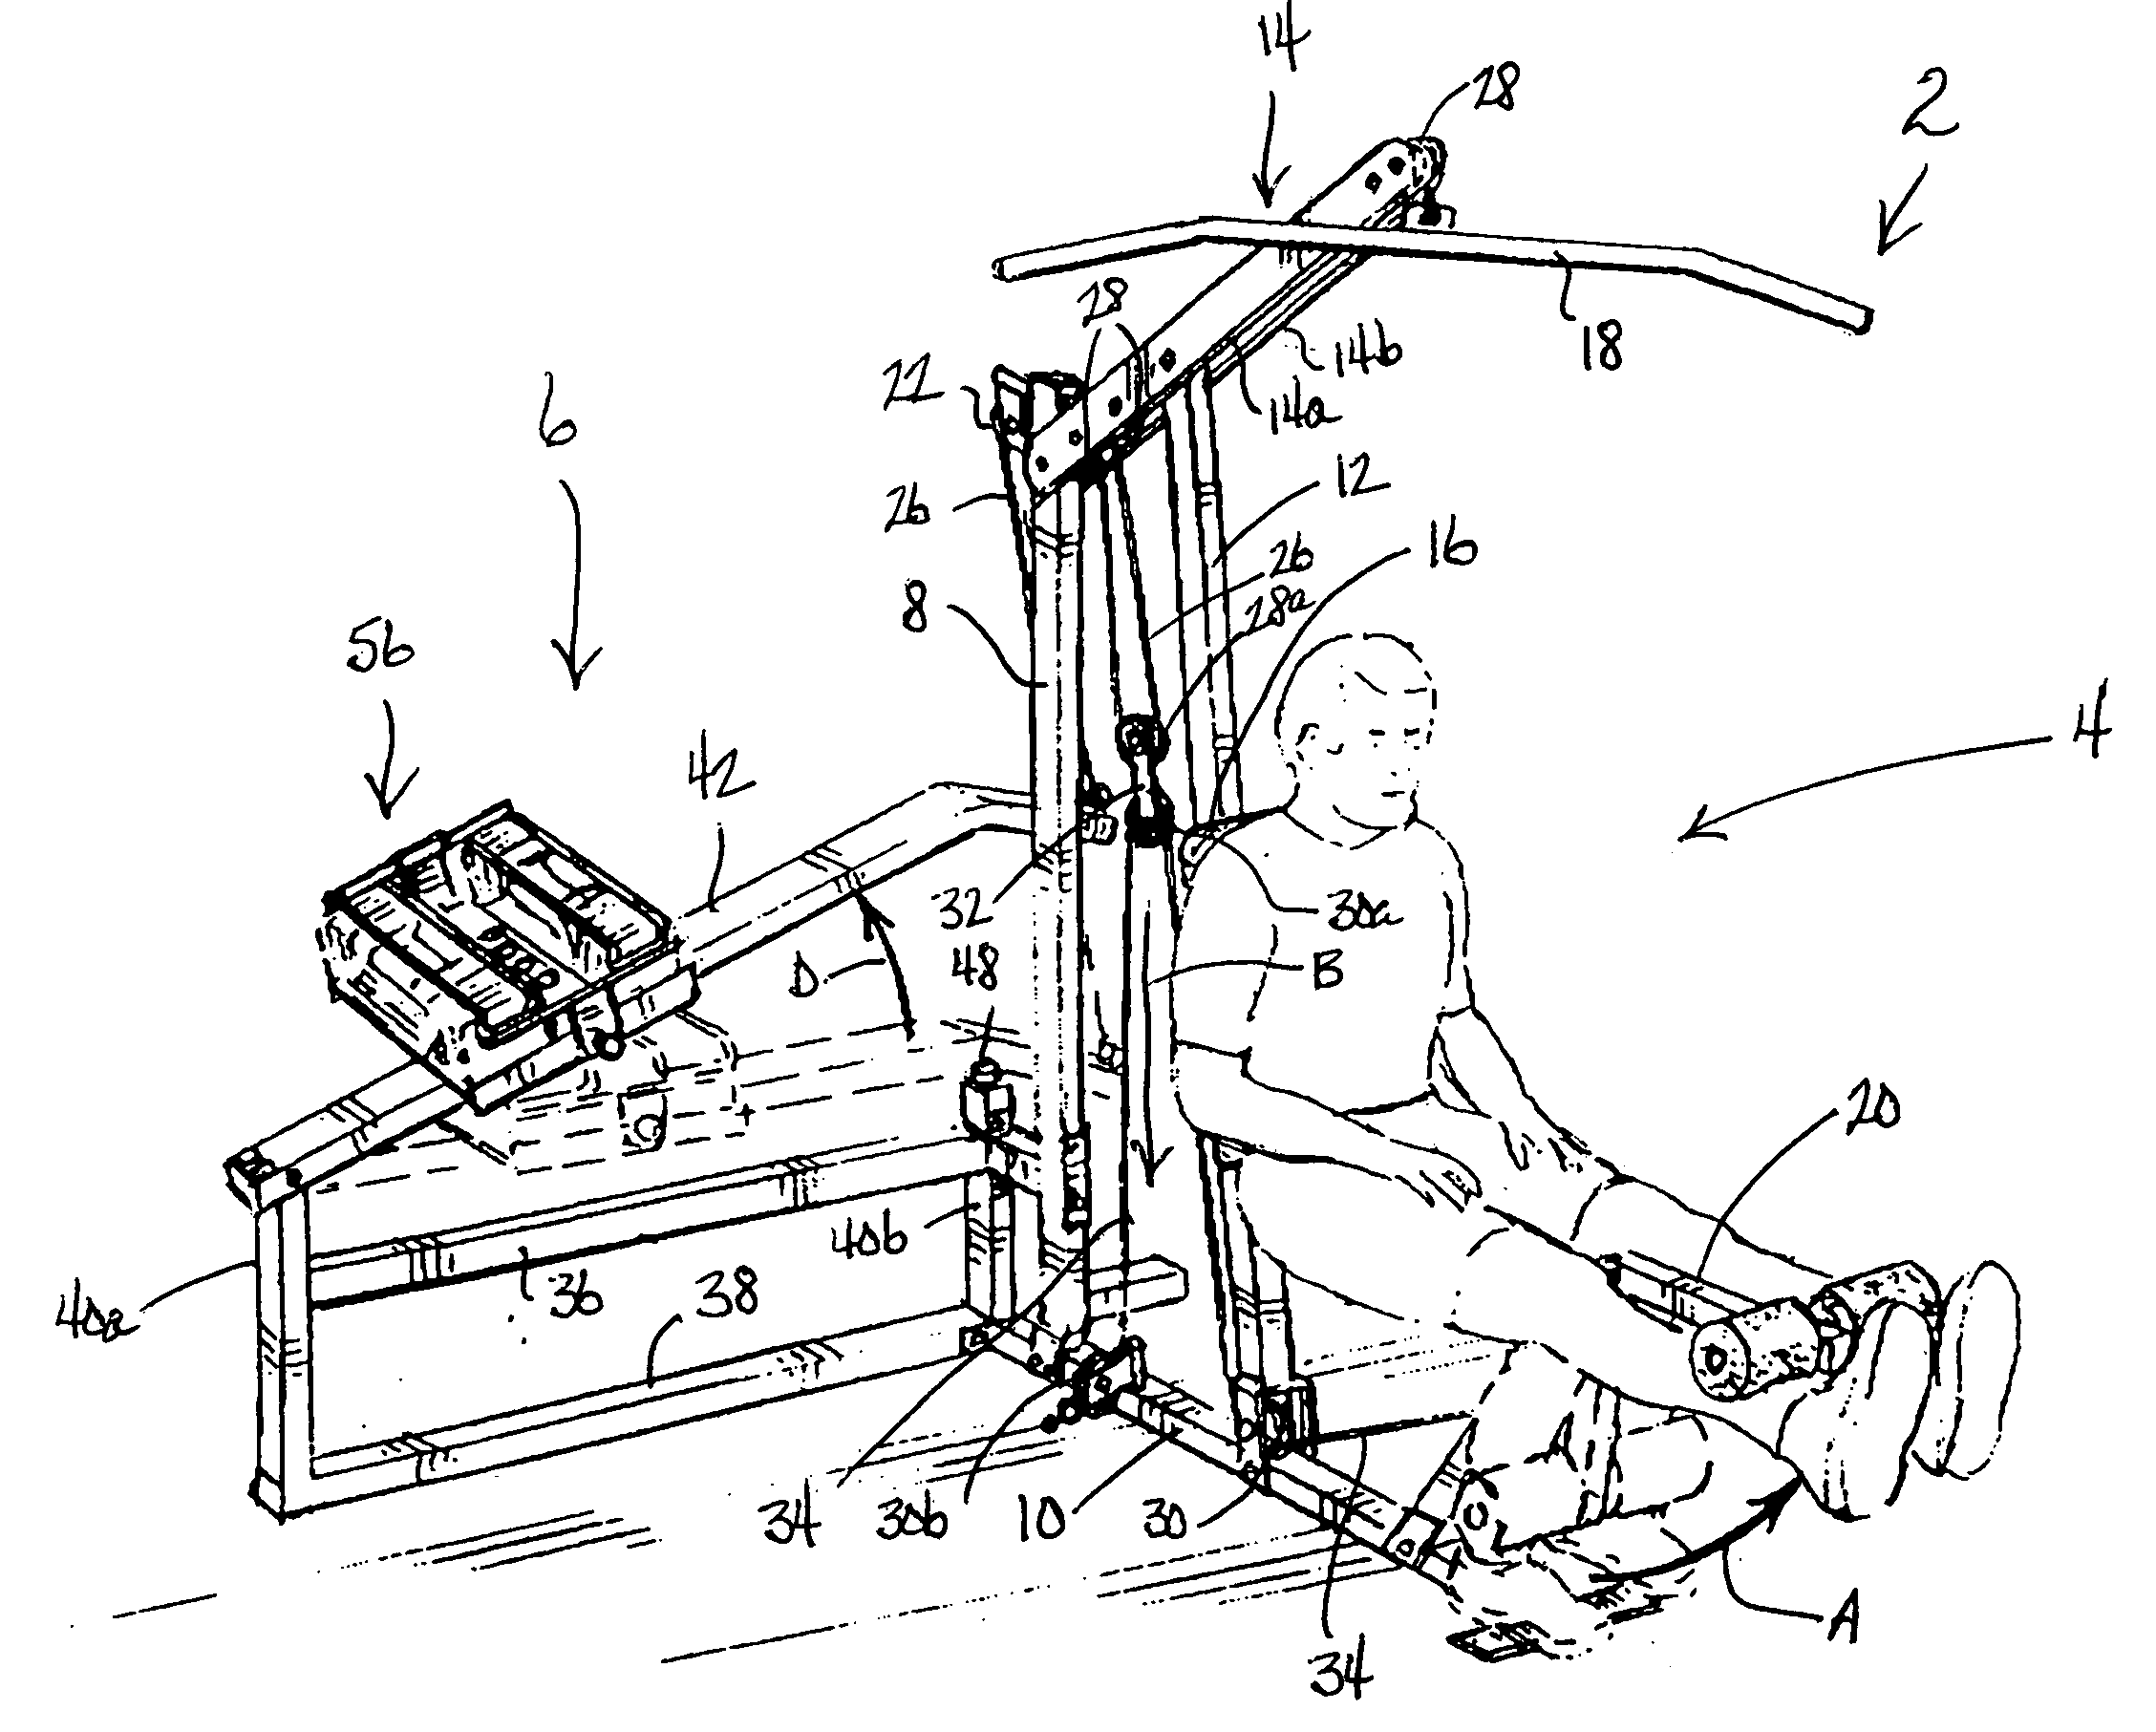 Exercise machine using lever mounted selectorized dumbbells as exercise mass